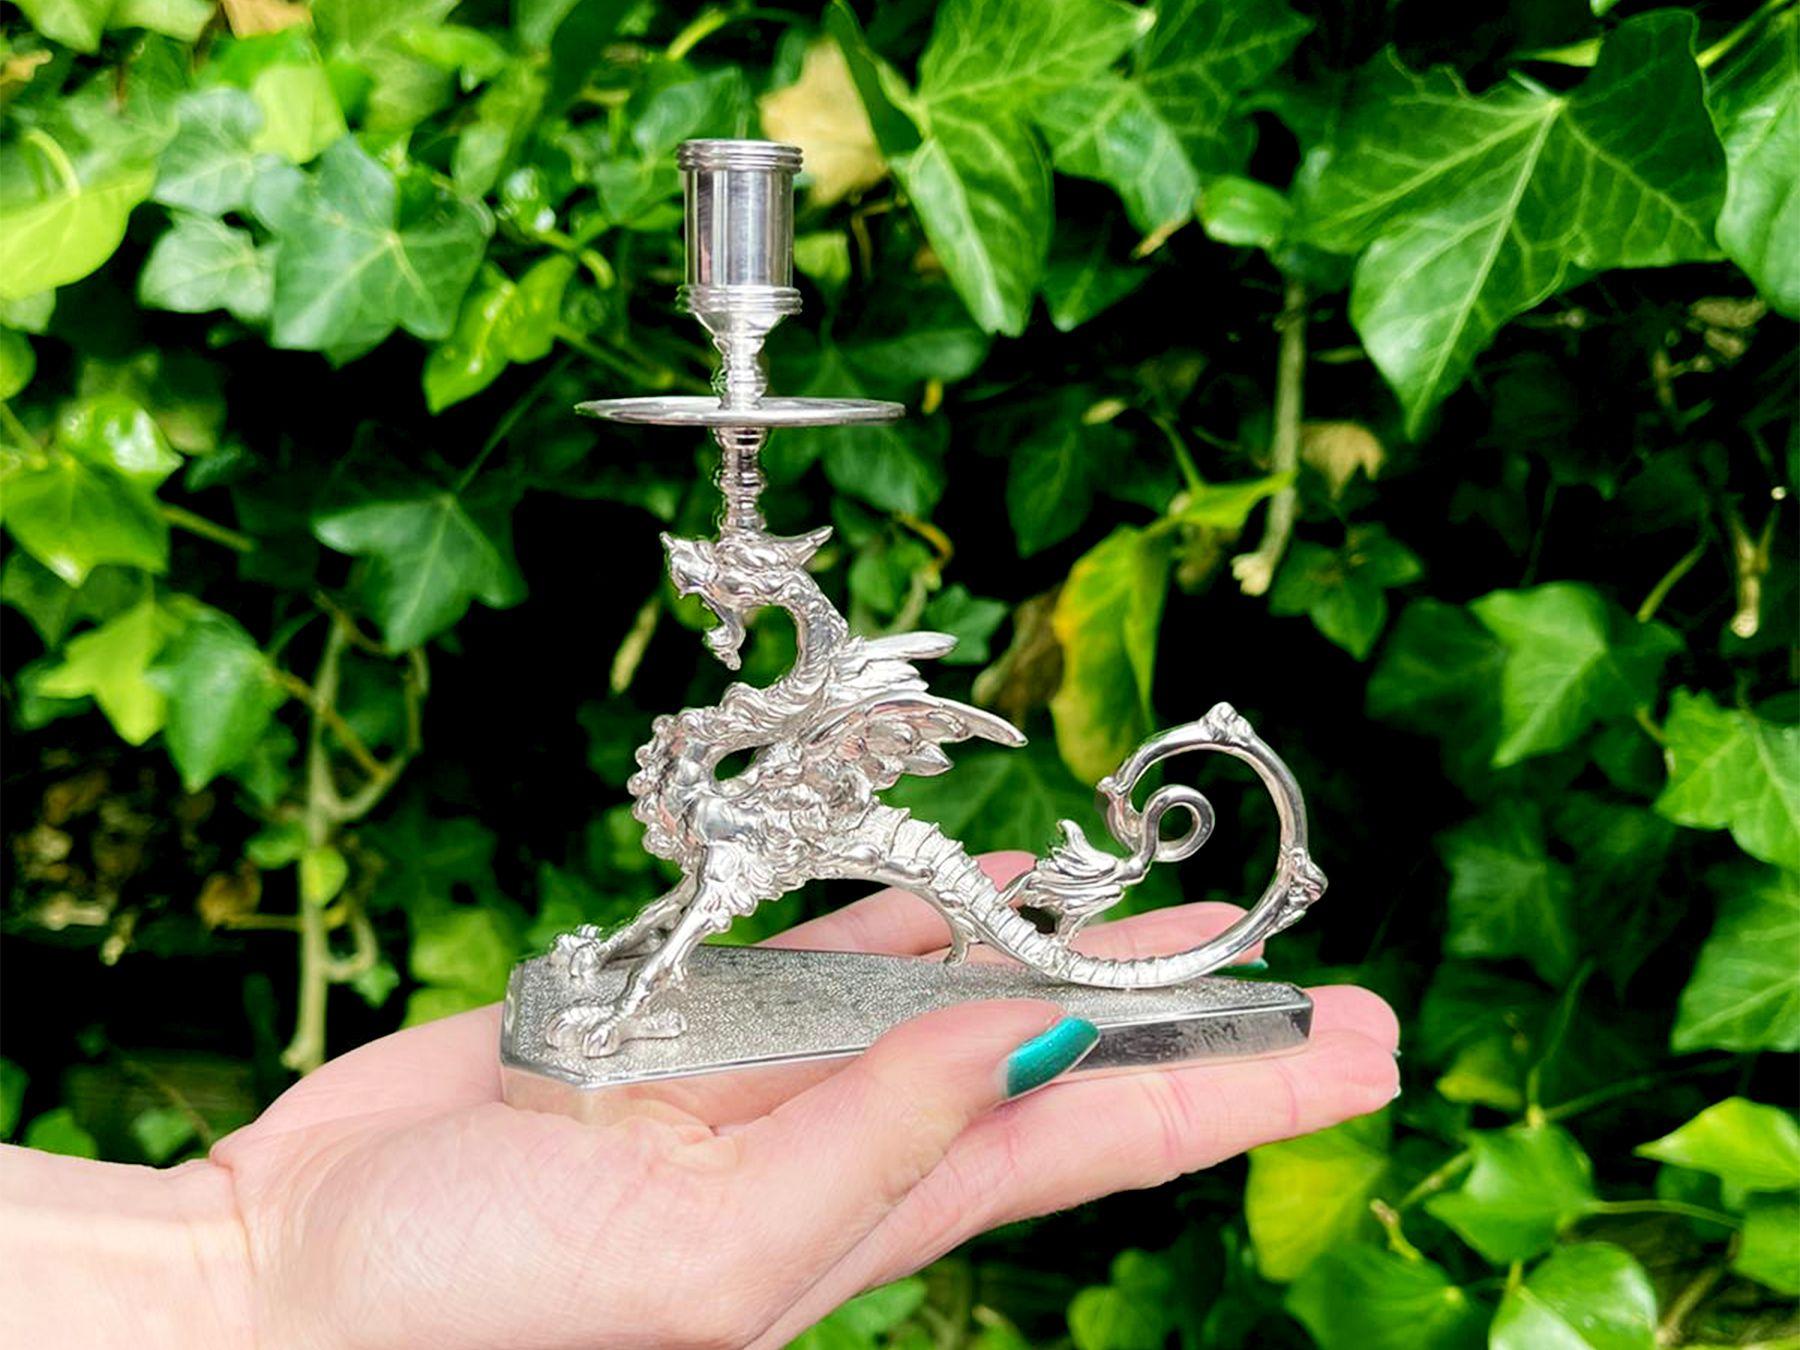 An exceptional, fine and impressive antique Victorian English sterling silver wyvern taperstick; an addition of our ornamental silverware collection.

This exceptional antique Victorian sterling silver taperstick/taper candlestick has a tapering